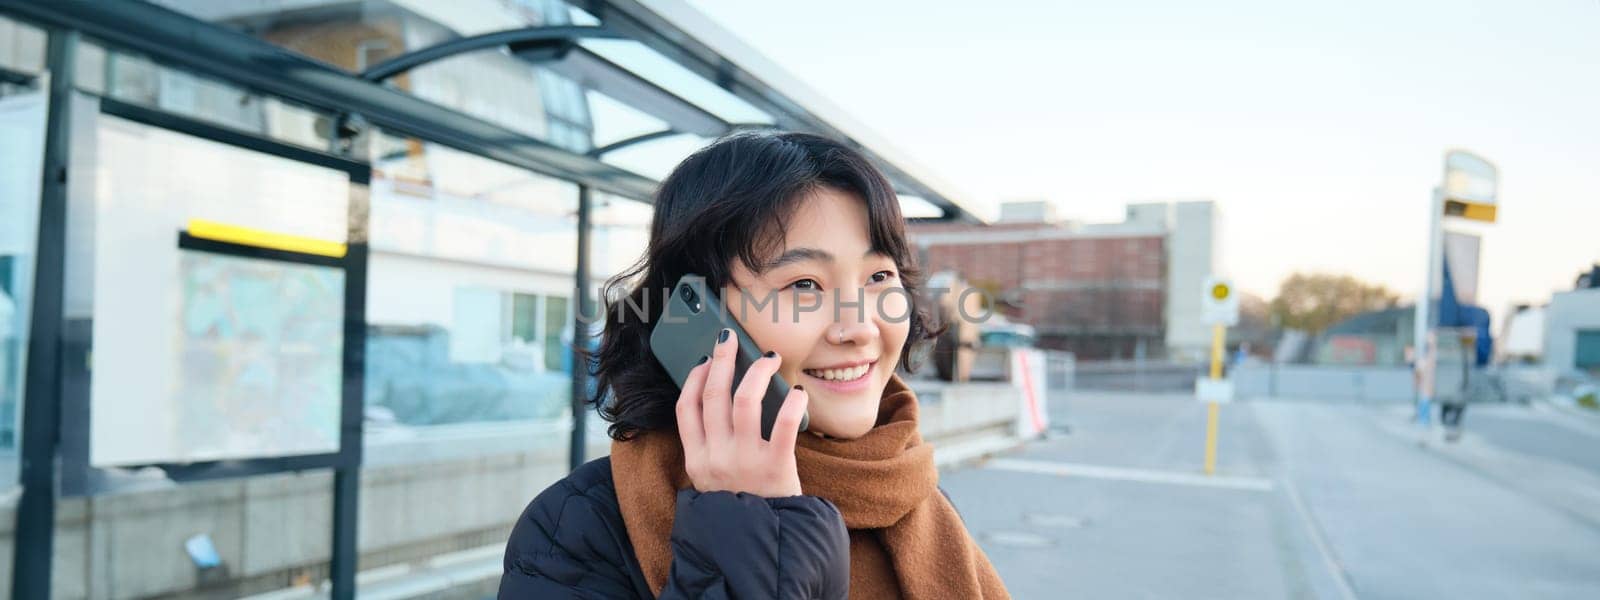 Smilling Korean girl talking on mobile phone, standing on bus stop, using smartphone, posing on road in winter, wrapped in scarf, wearing black jacket.